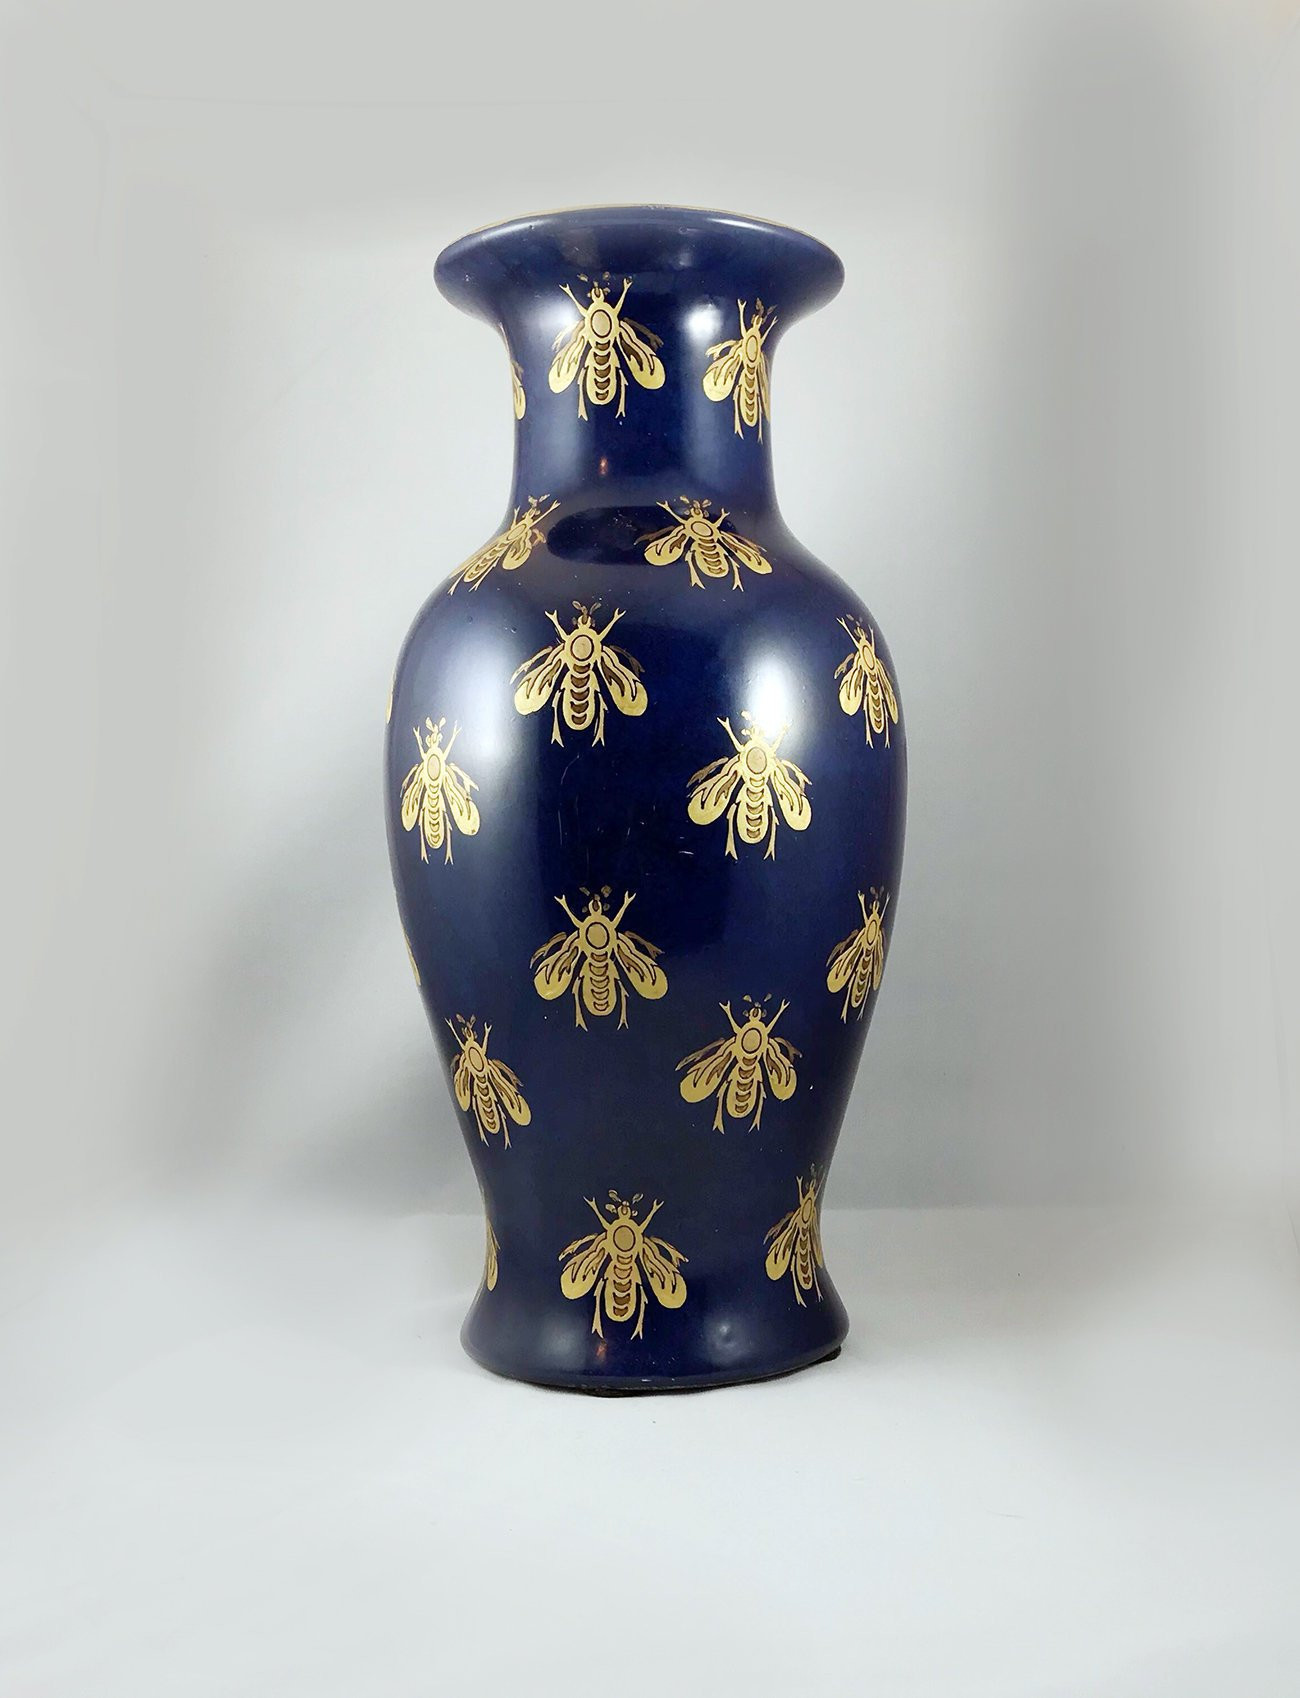 20 attractive Tall Blue Ceramic Vase 2024 free download tall blue ceramic vase of royal blue flower vase with golden hand painted bumble bees etsy inside dc29fc294c28ezoom